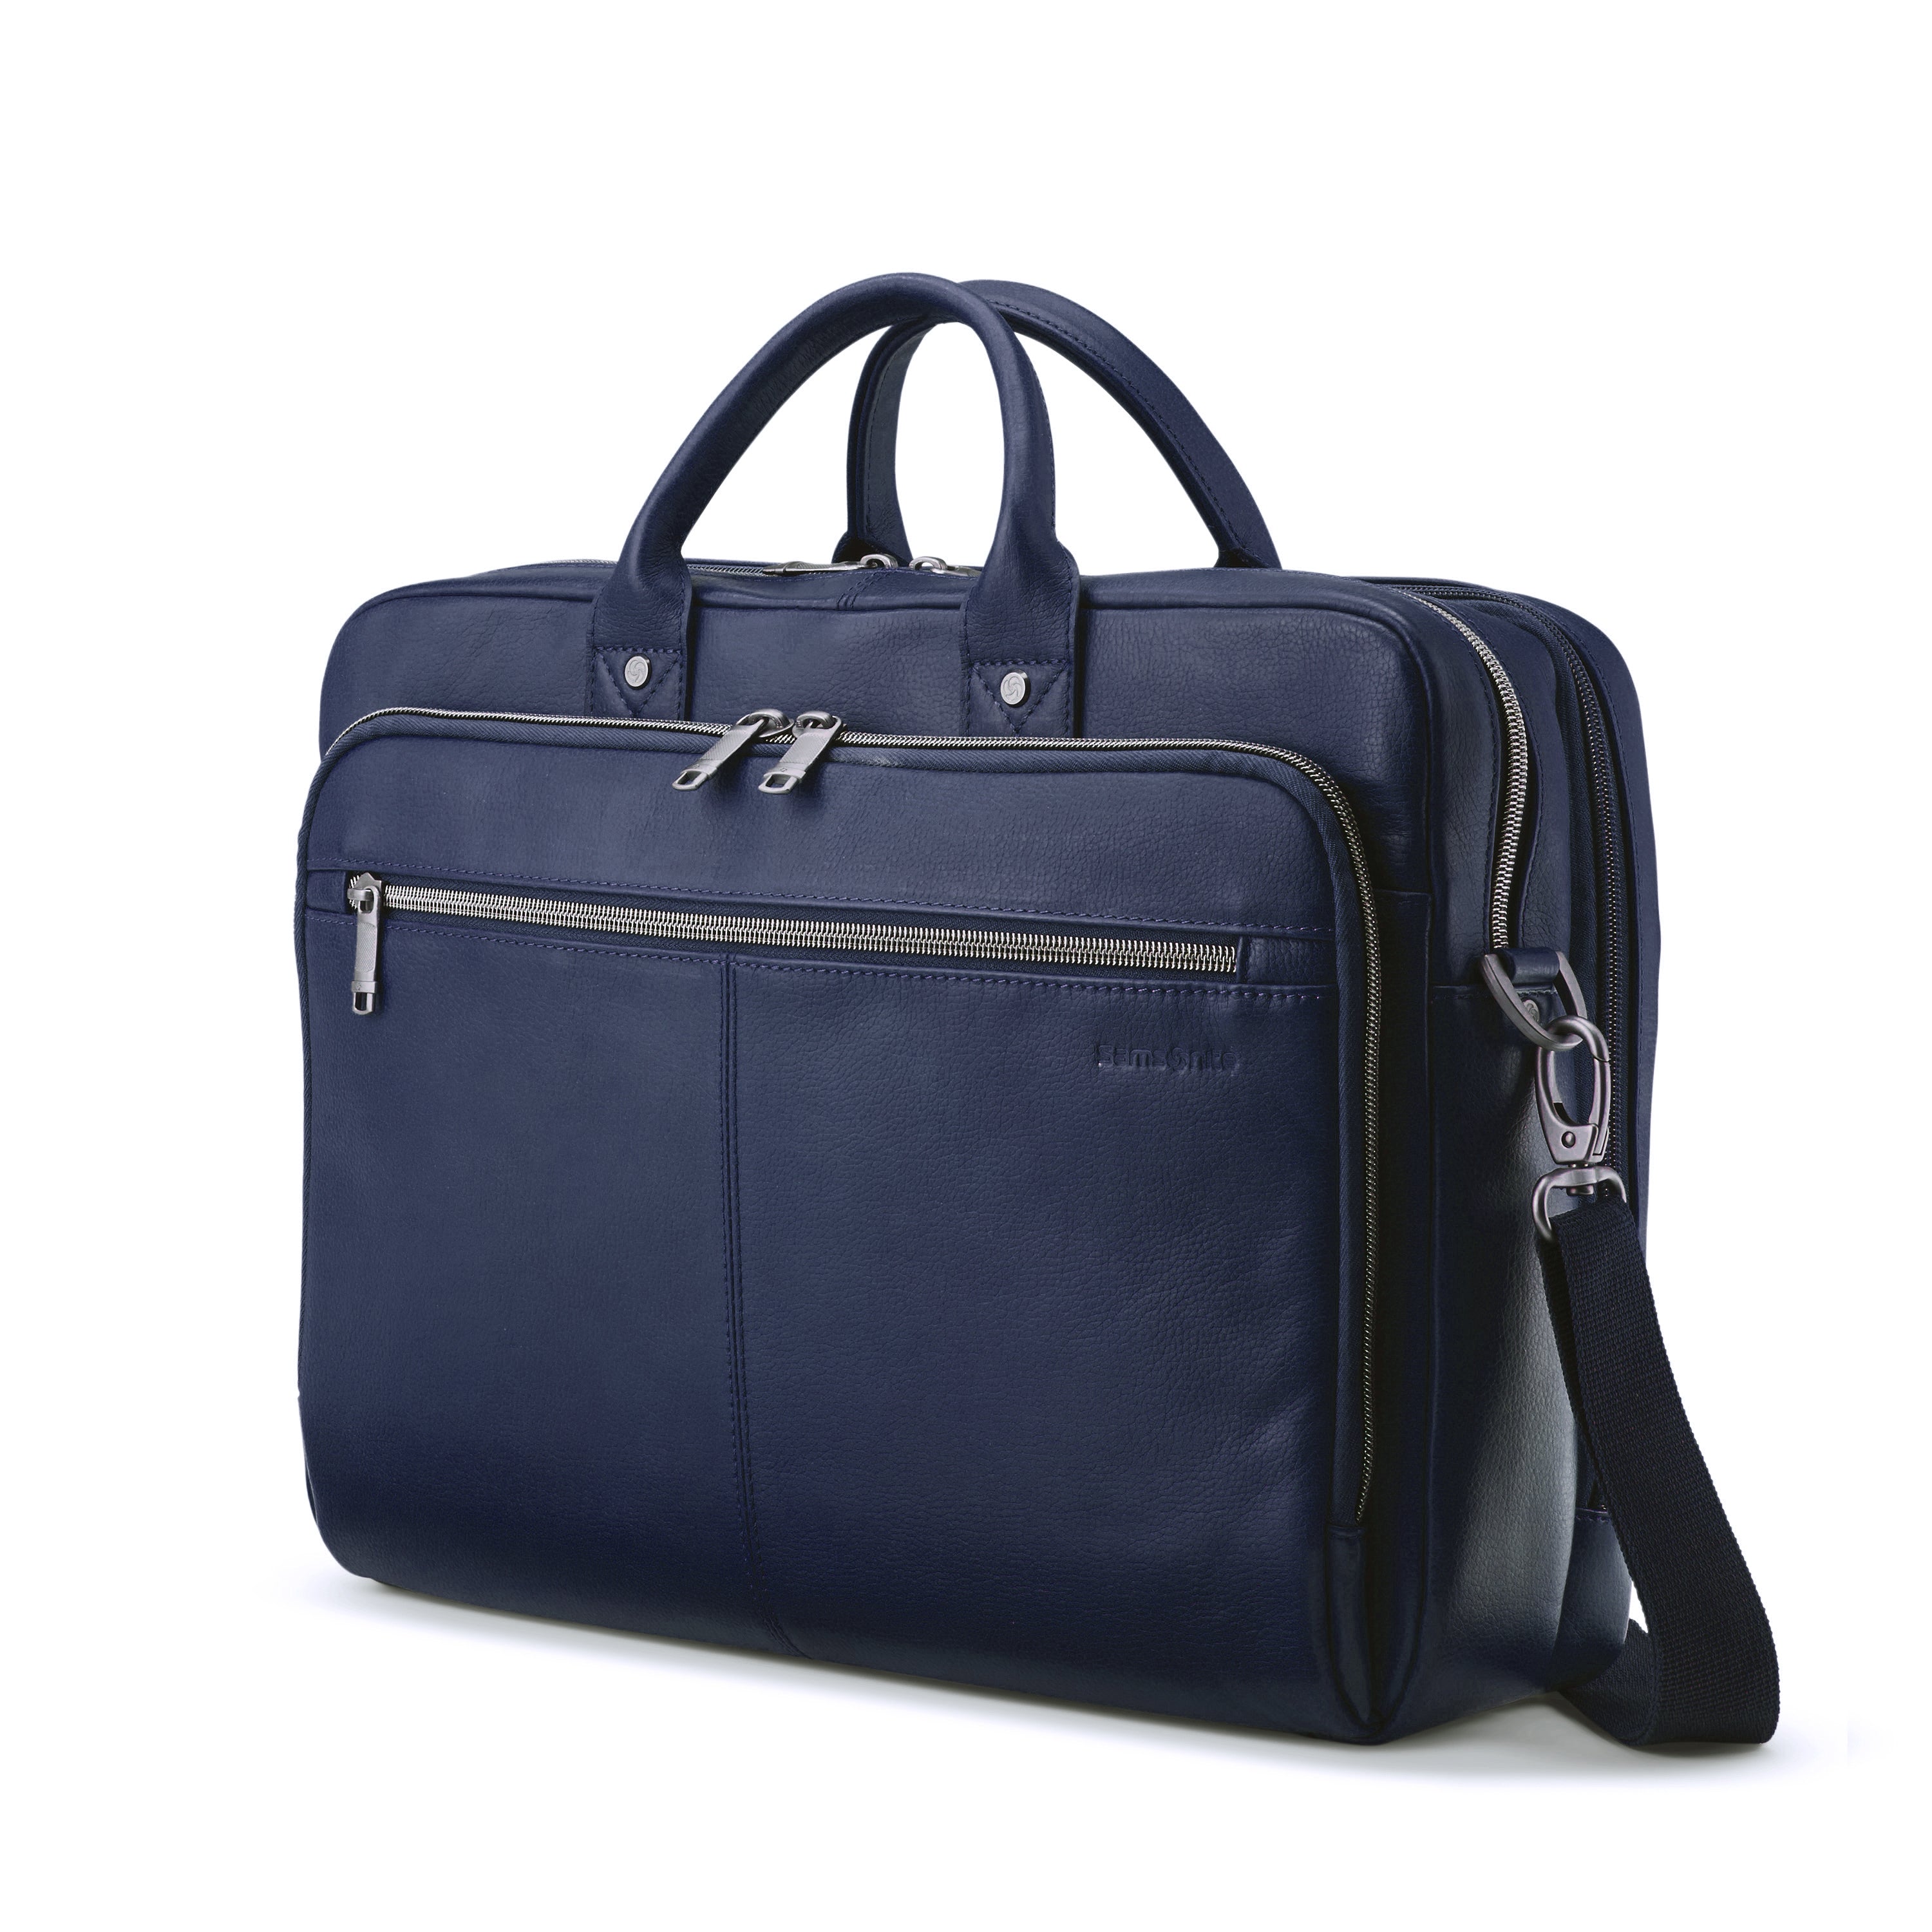 Samsonite Classic Leather 126039 Top Loader Briefcase - Navy - 0